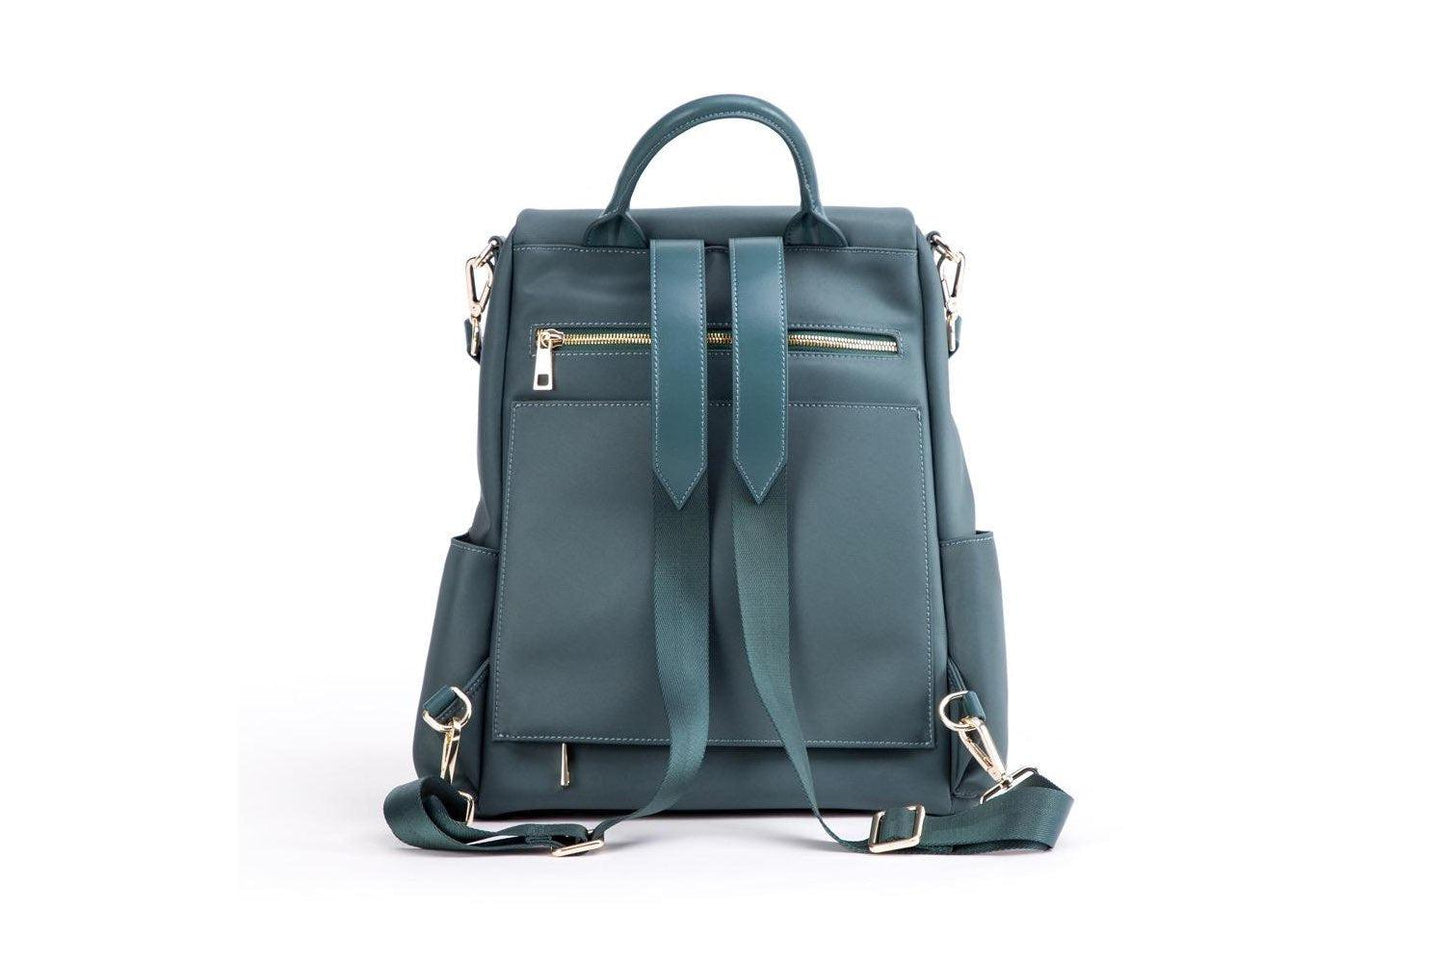 LYMIA Nylon Sophie Backpack - "Steal the Show"